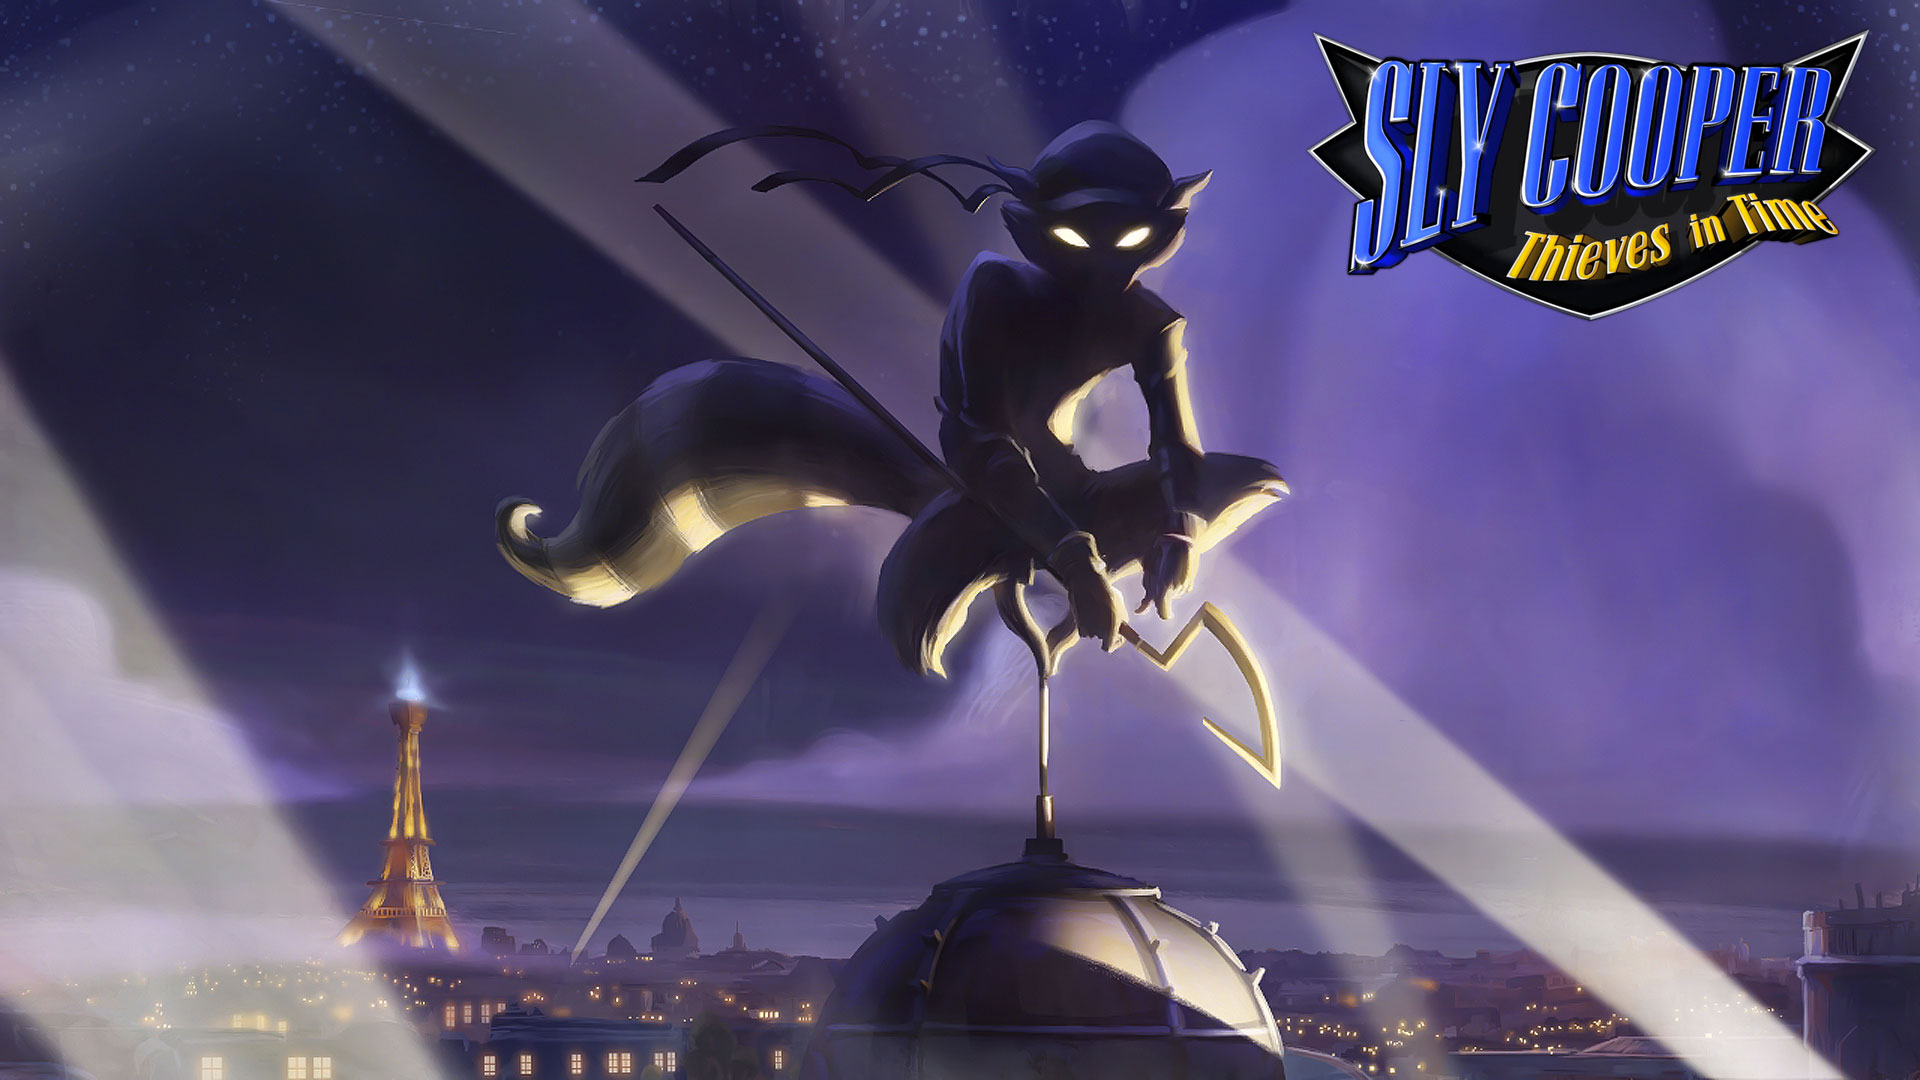 Sly Cooper Thieves in Time Wallpapers in HD Page 2 1920x1080